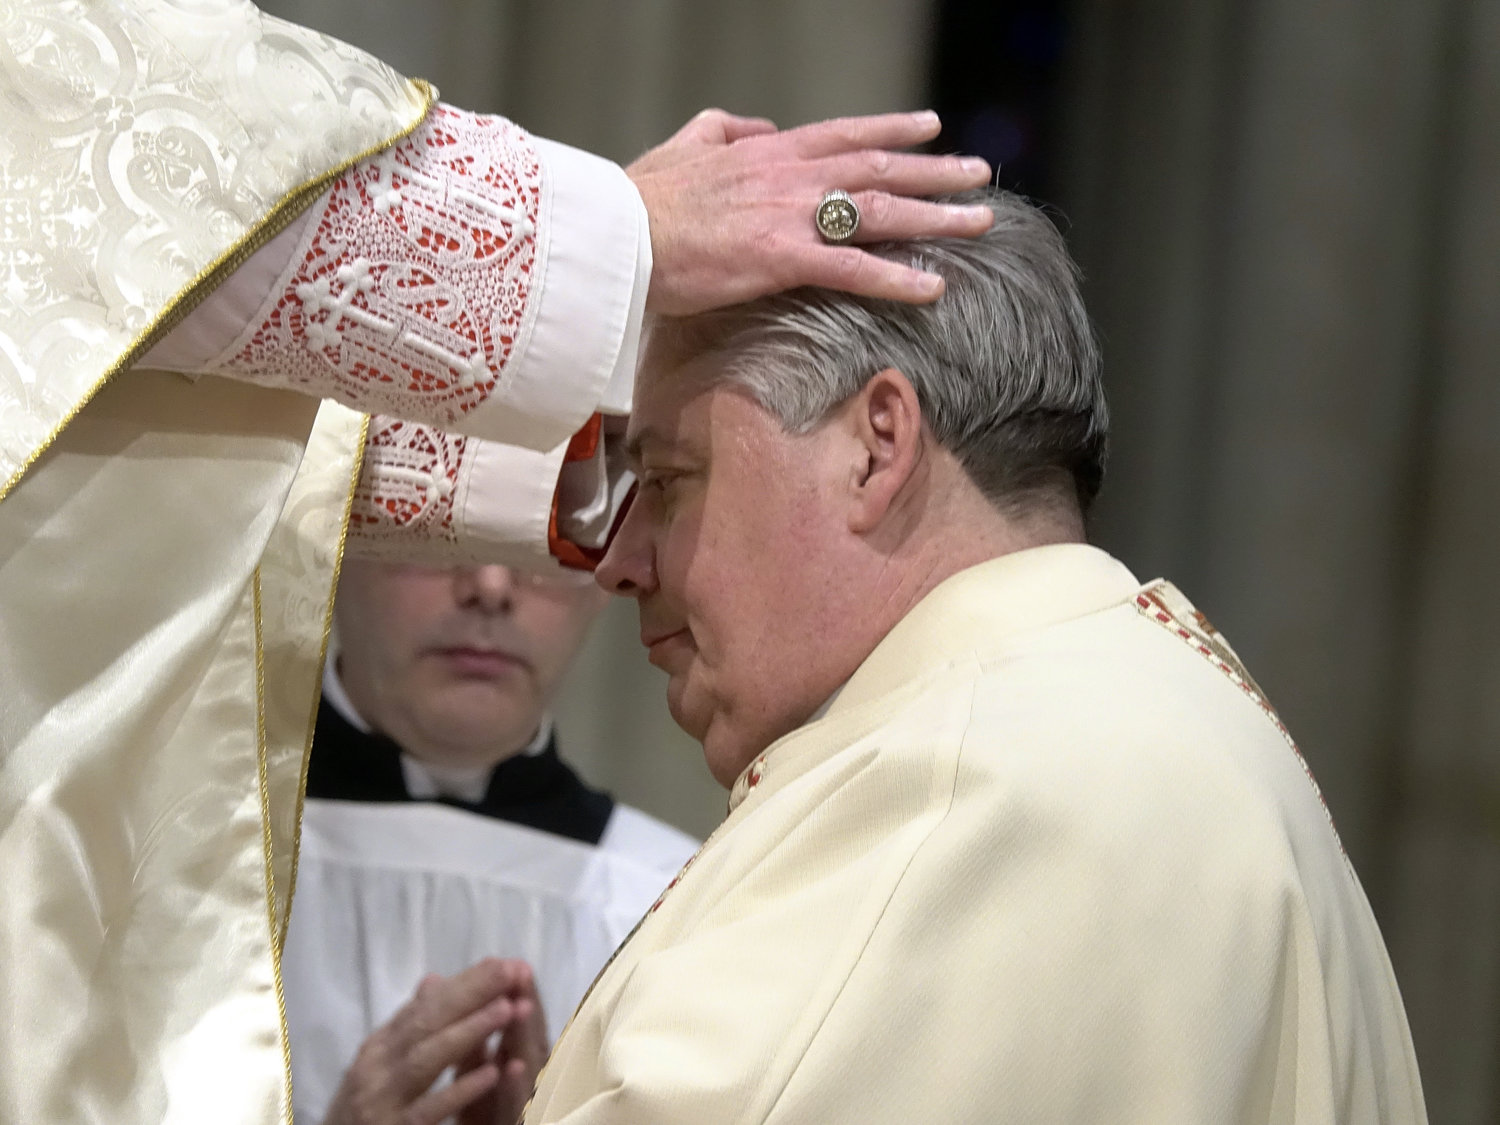 Cardinal Dolan lays hands on the head of Auxiliary Bishop John S. Bonnici, 57, during his episcopal ordination March 1 at St. Patrick's Cathedral.